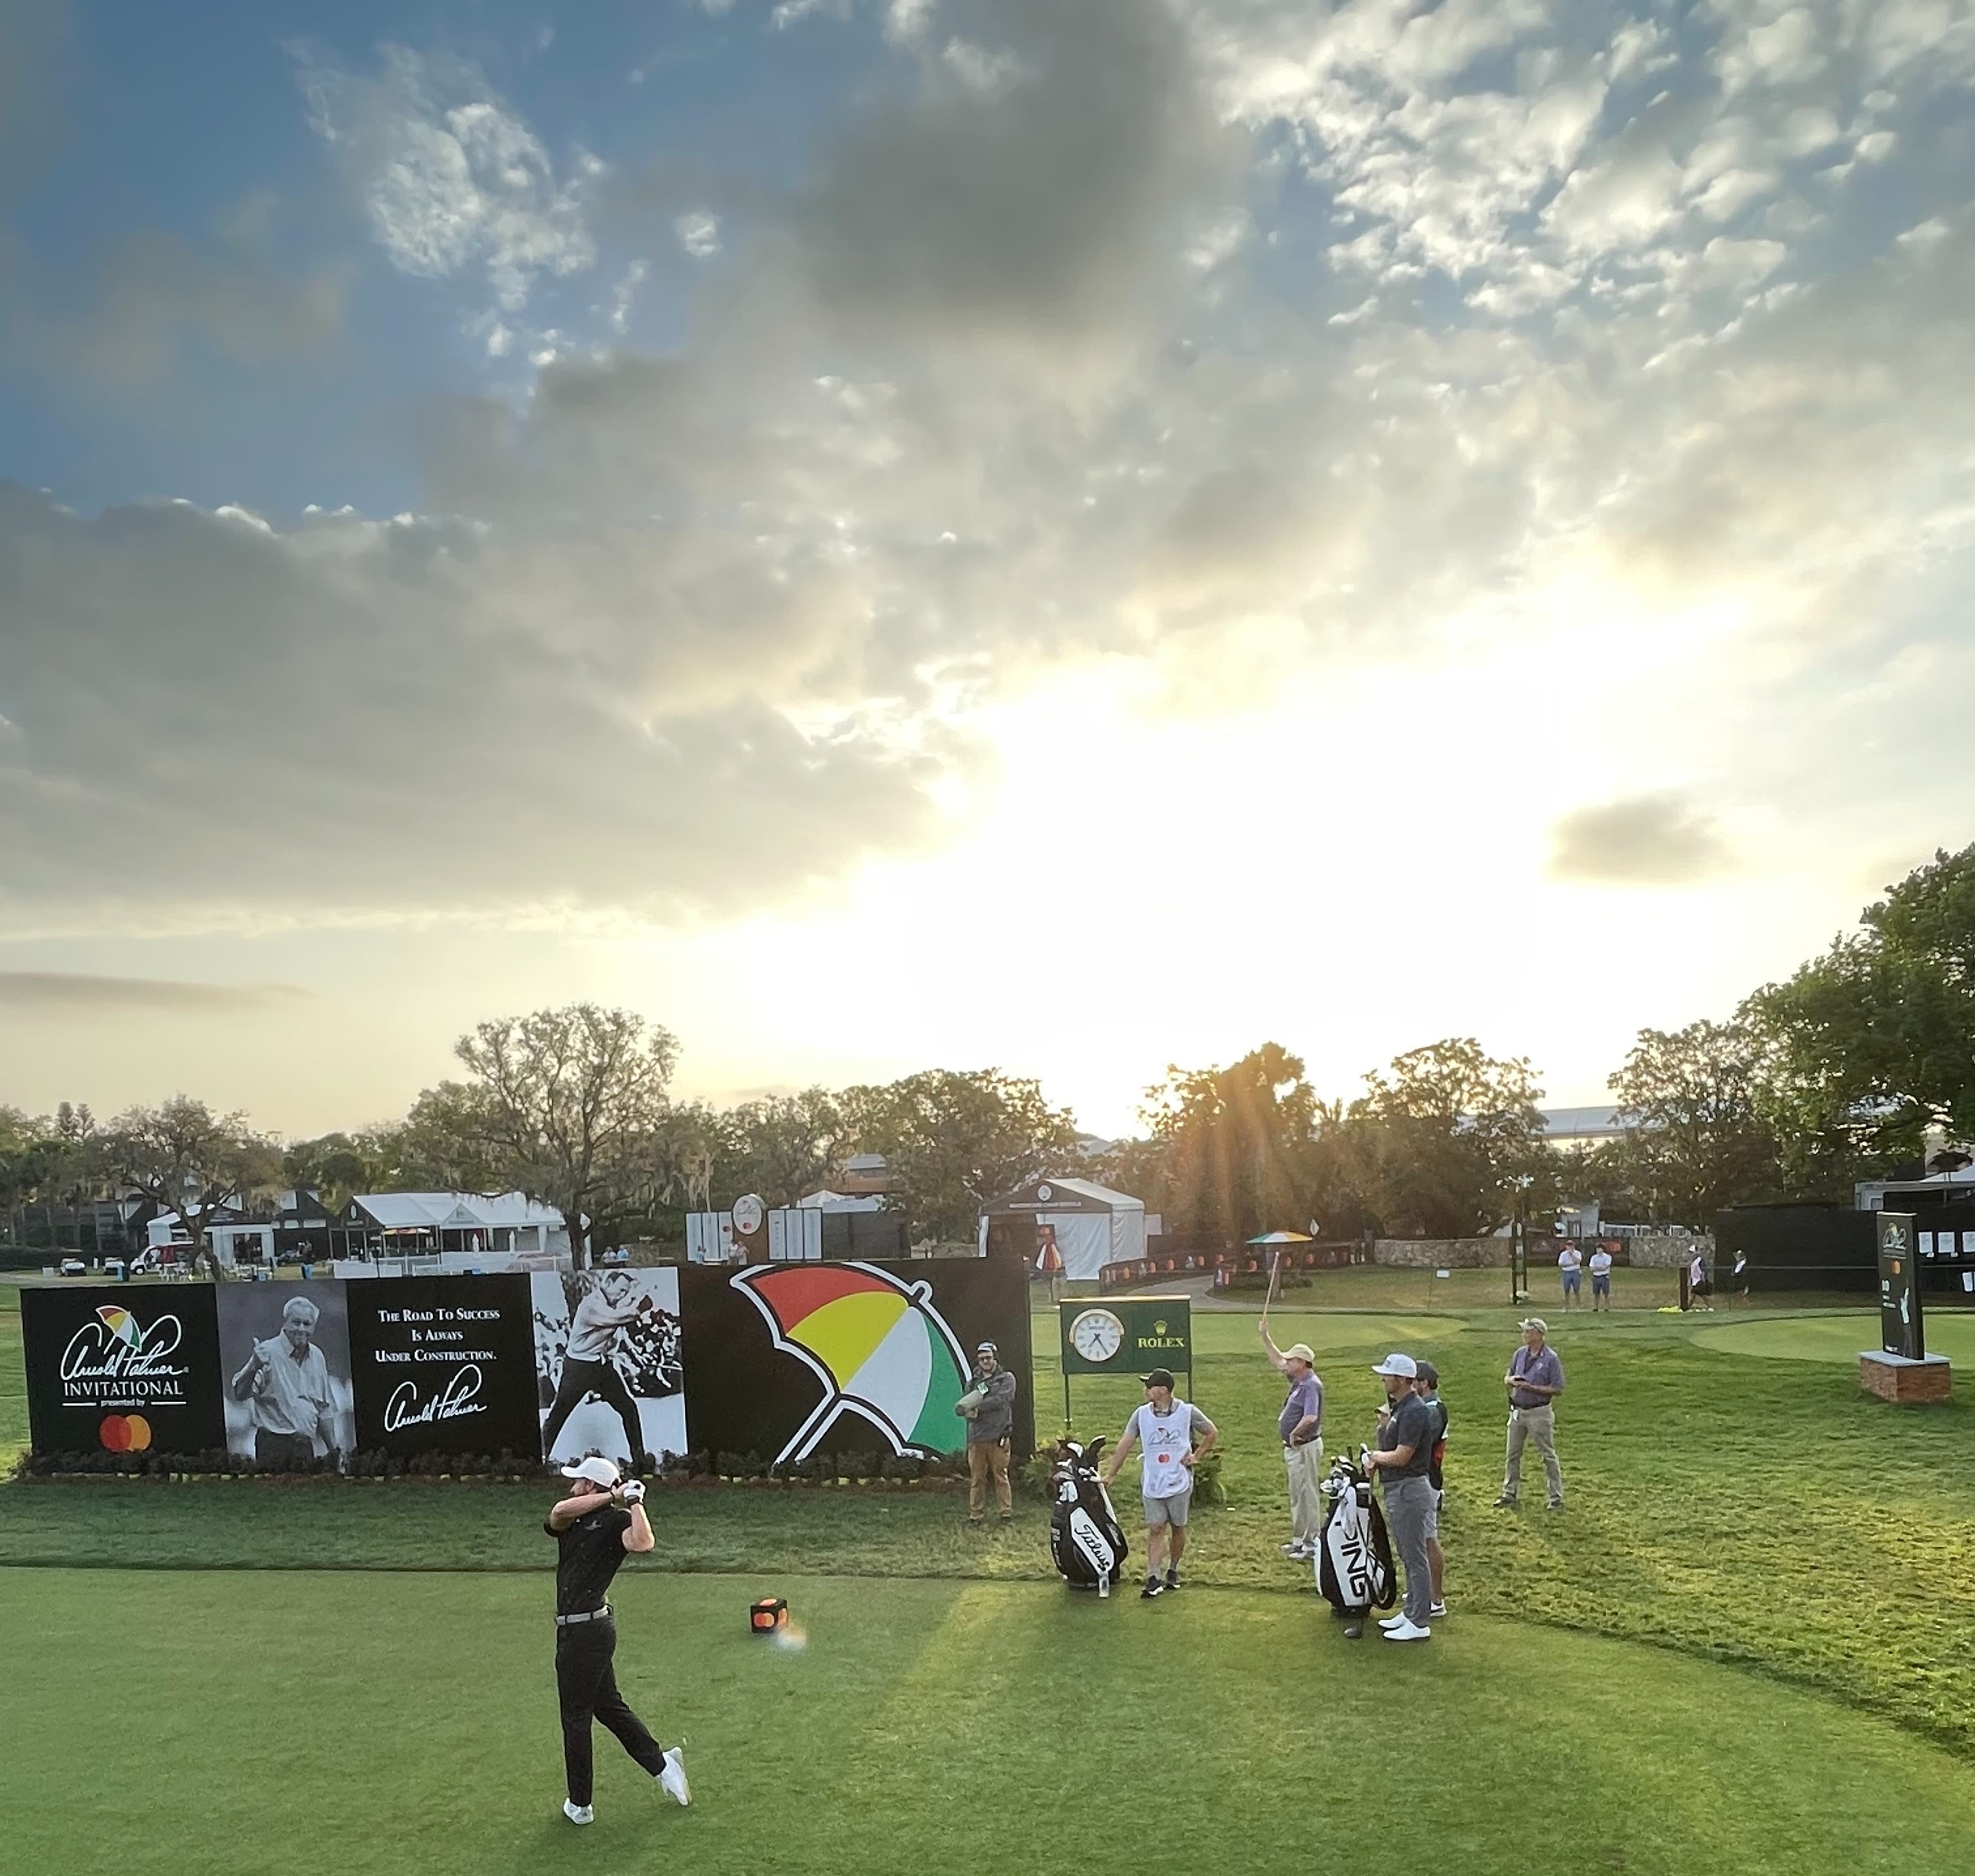 With the sun shining down on him, Greg Koch tees off on a memorable weekend at the Arnold Palmer Invitational.